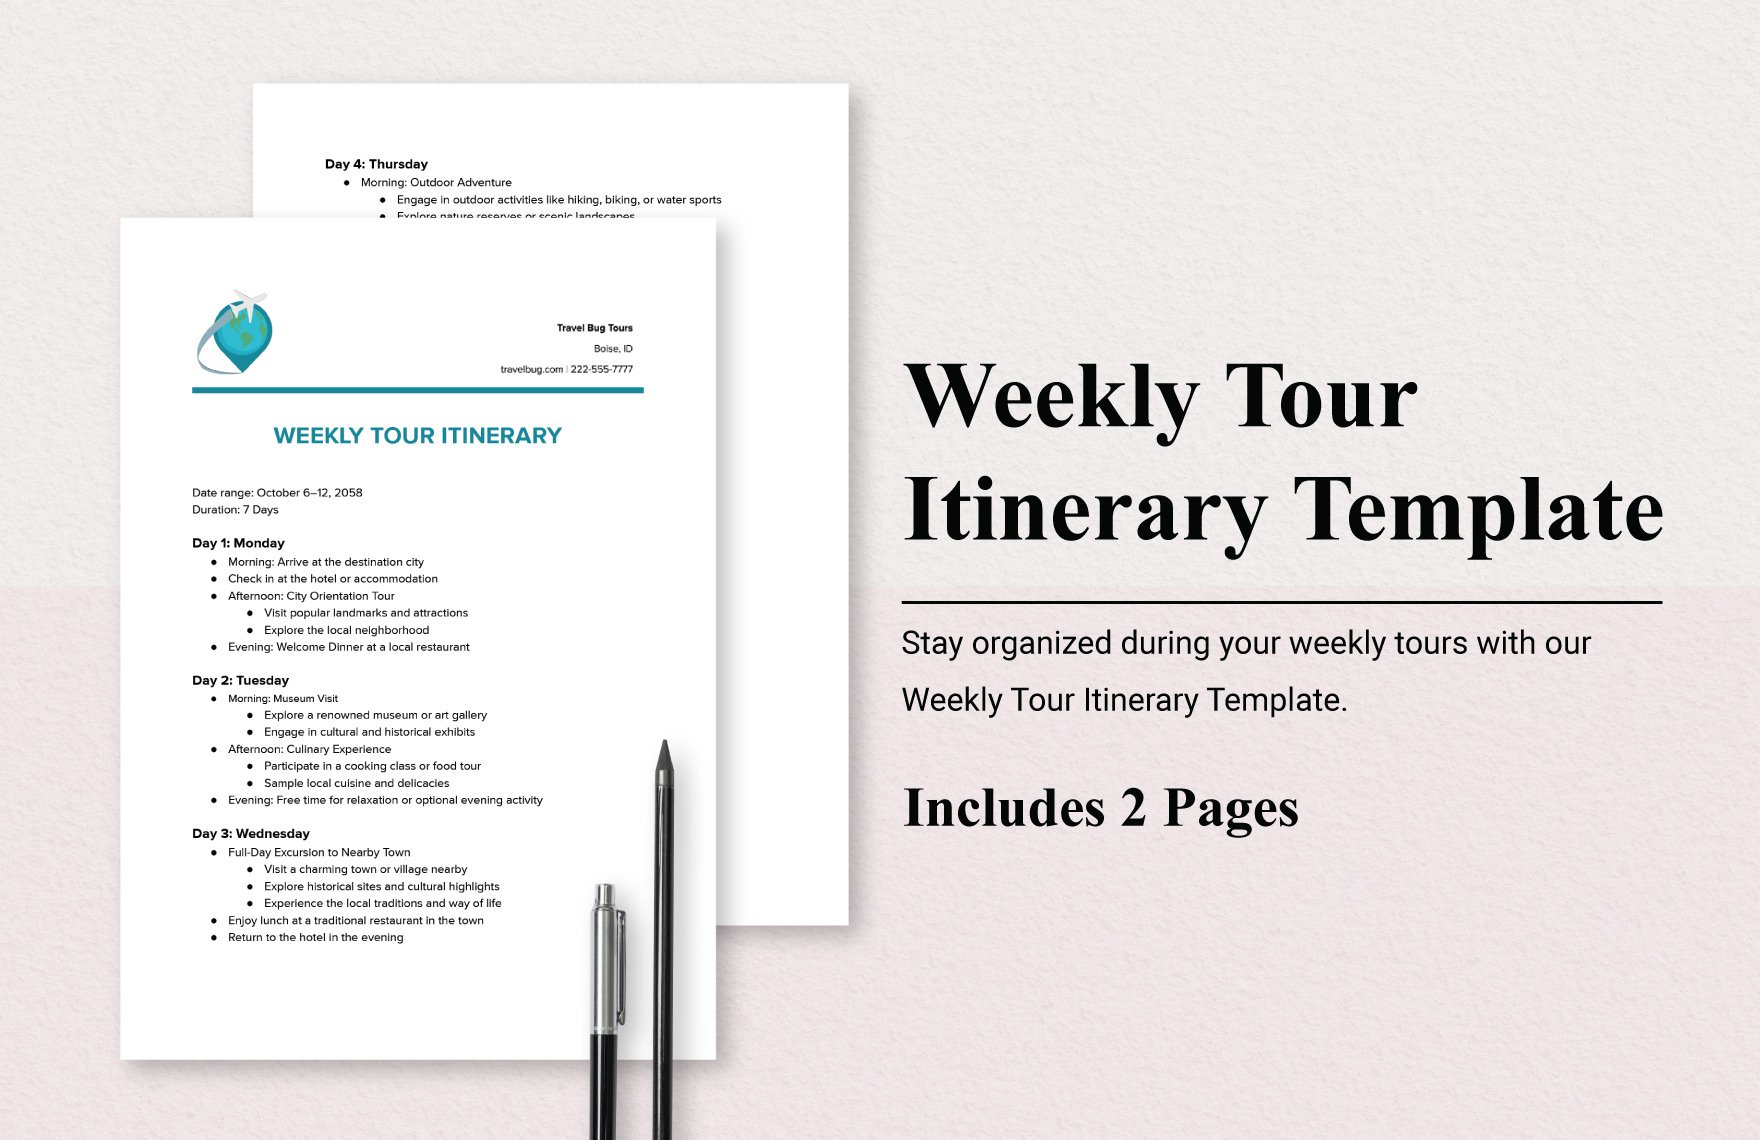 Weekly Tour Itinerary Template